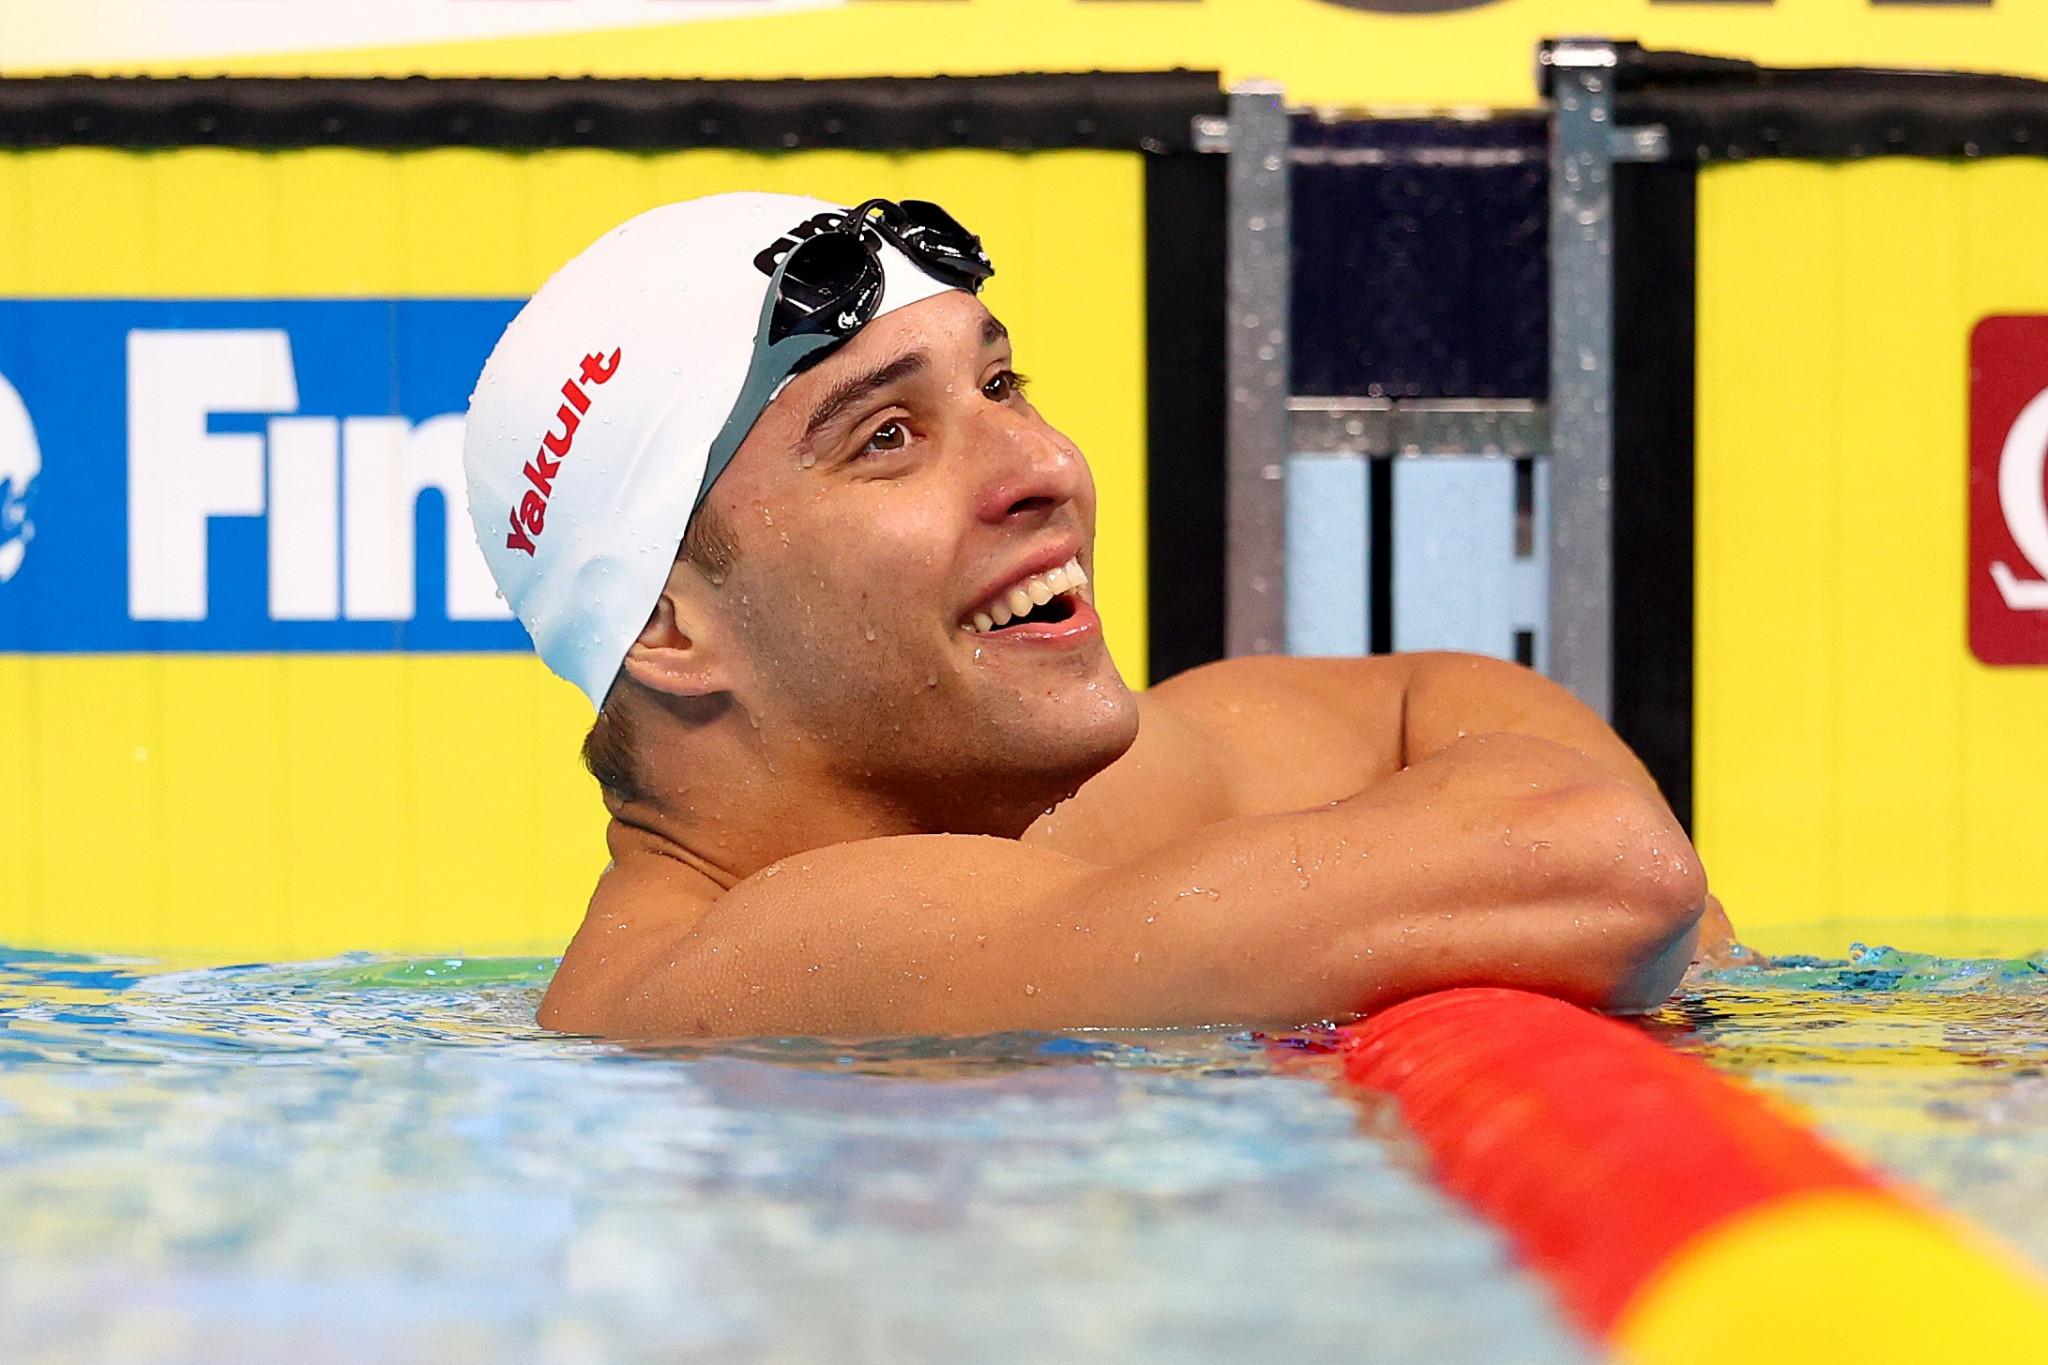 Ten-time world short course champion Chad Le Clos picked up another medal with bronze in the men's 200m butterfly ©Getty Images